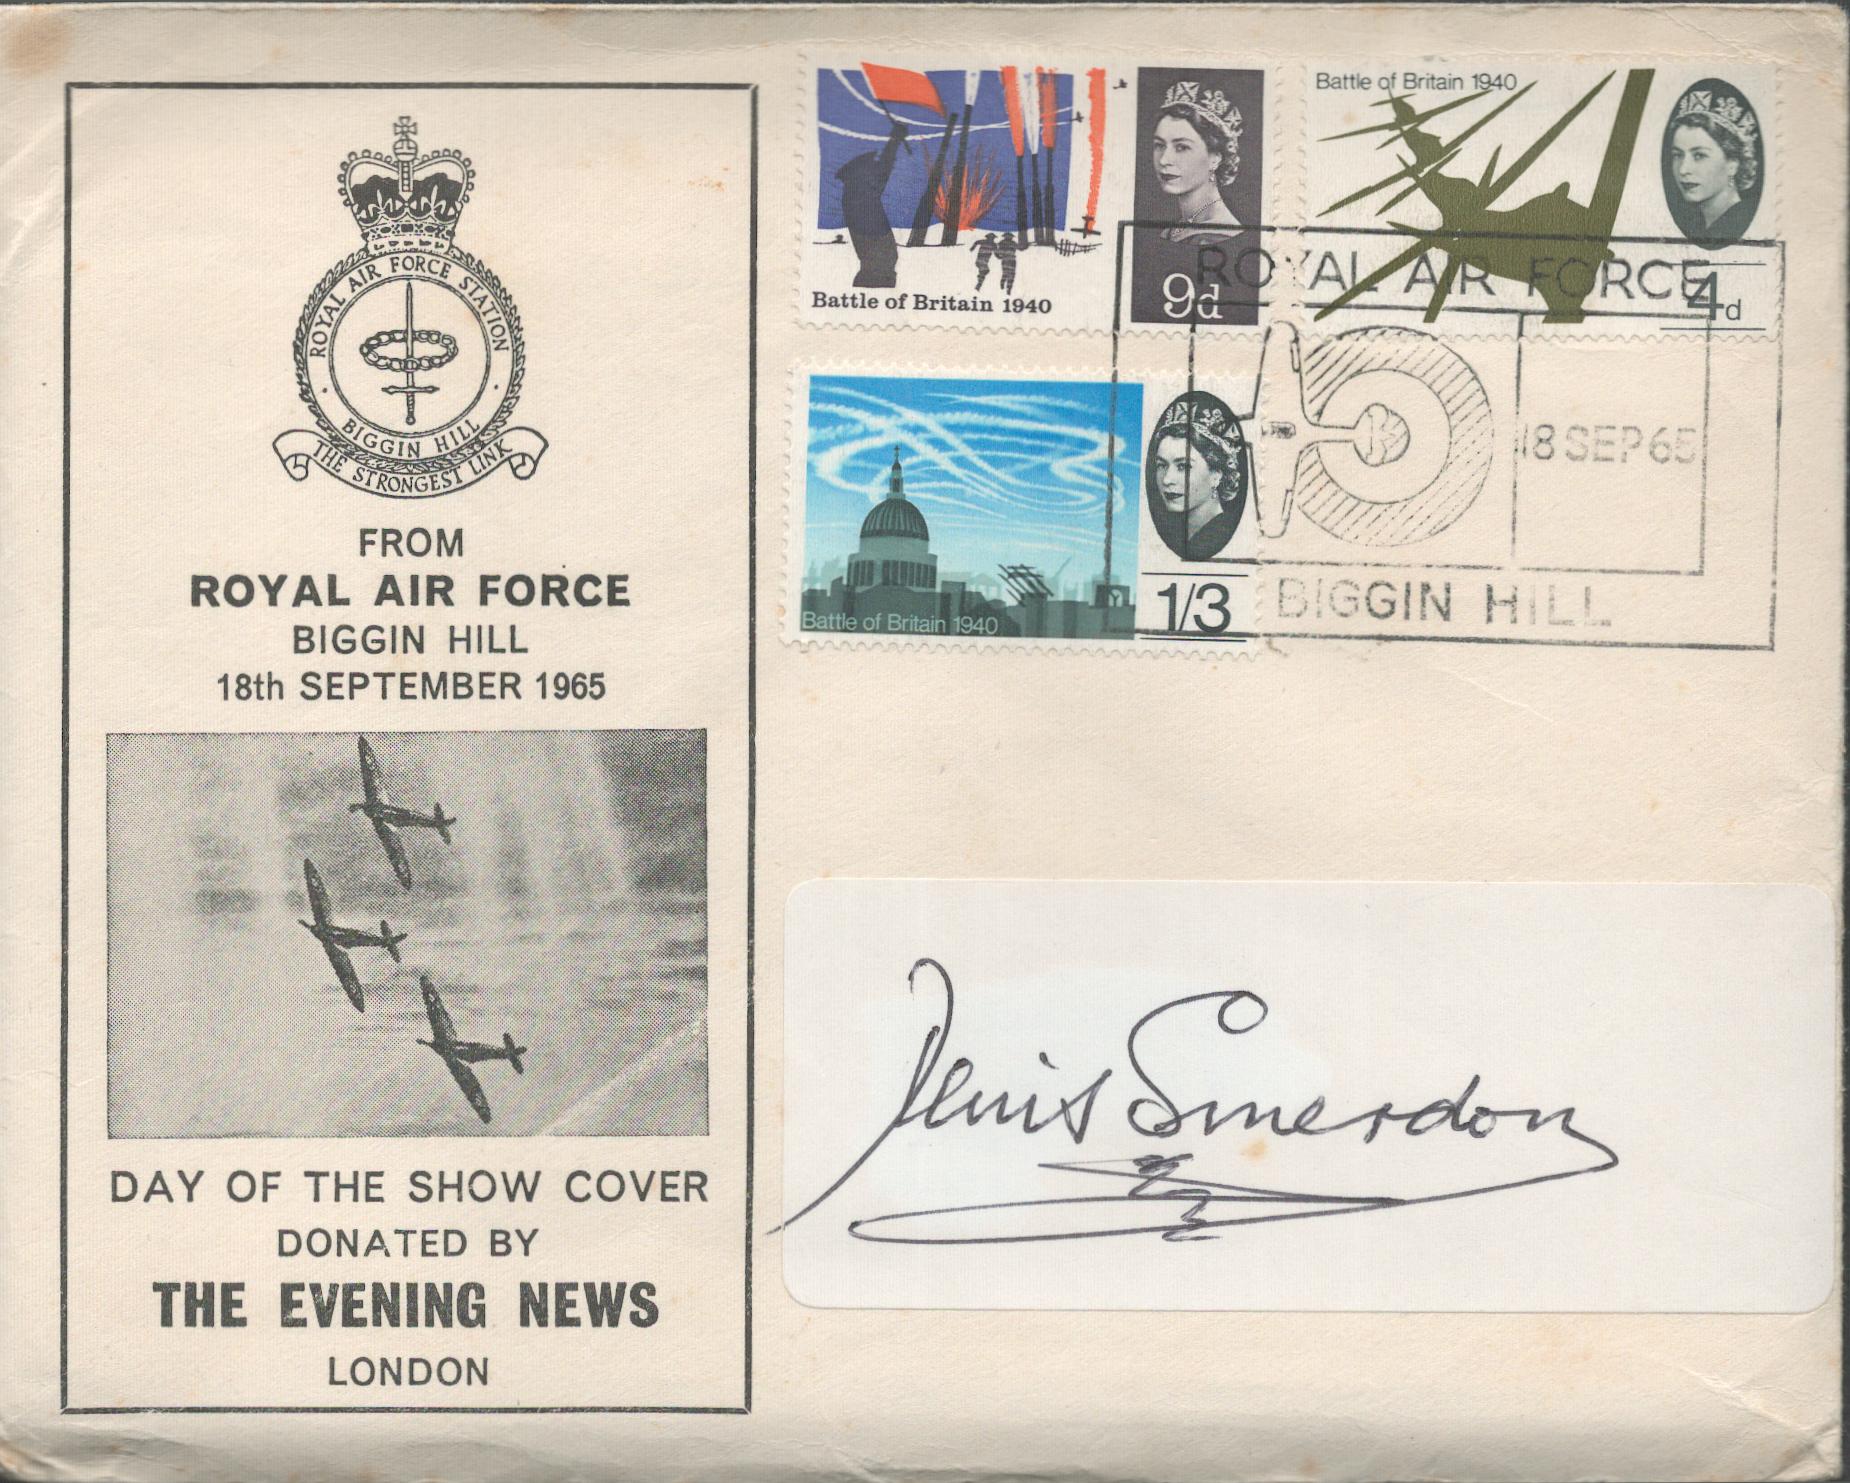 Denis Smerdon RAF hand signed RAF Biggin Hill 18th September 1965, Day of the Show Cover Donated